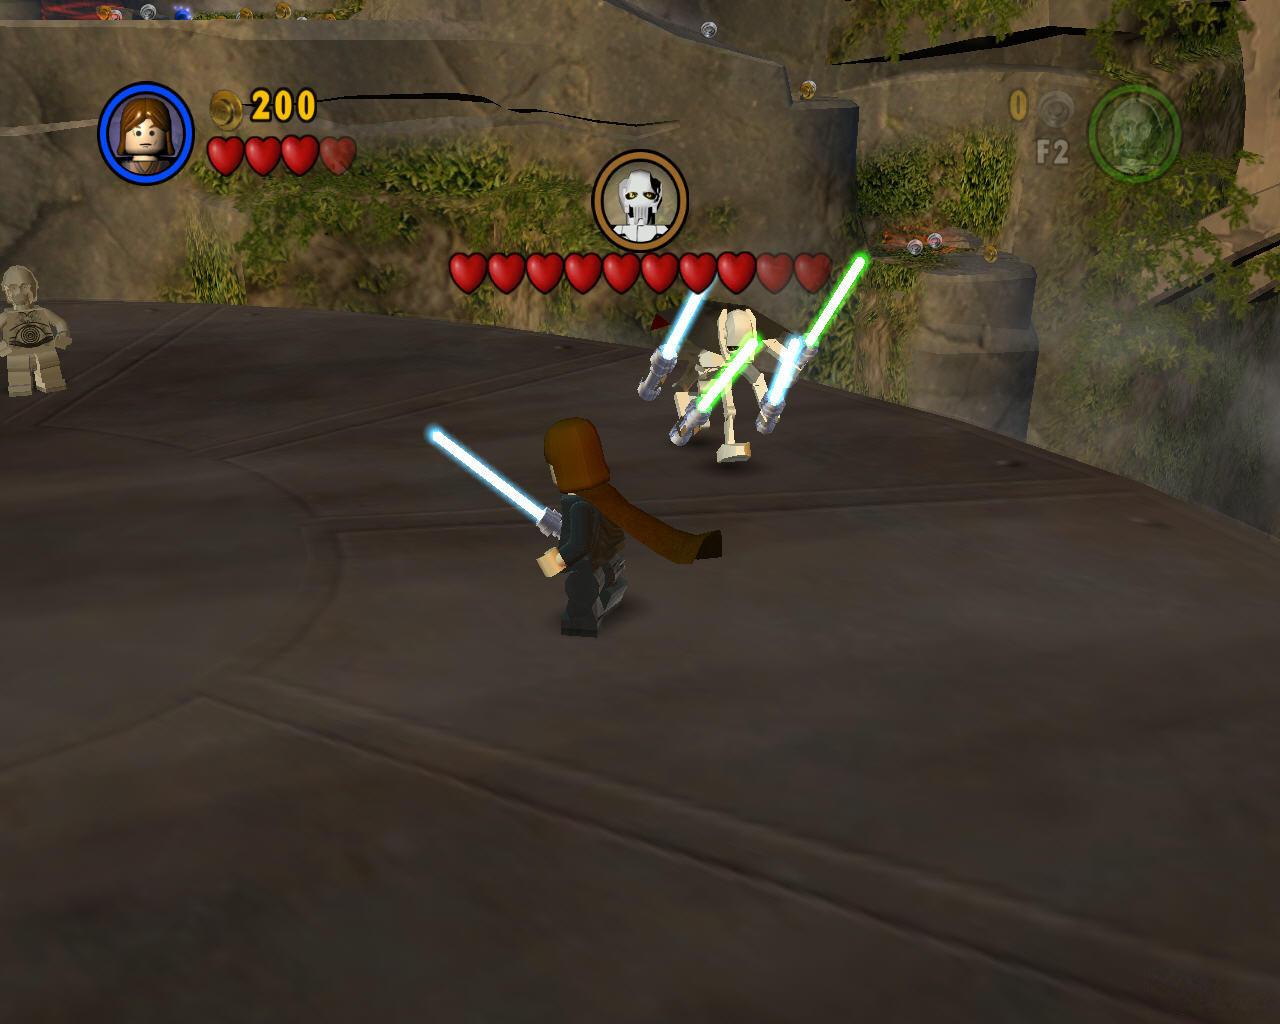 lego games for pc lego star wars games for pc free no download